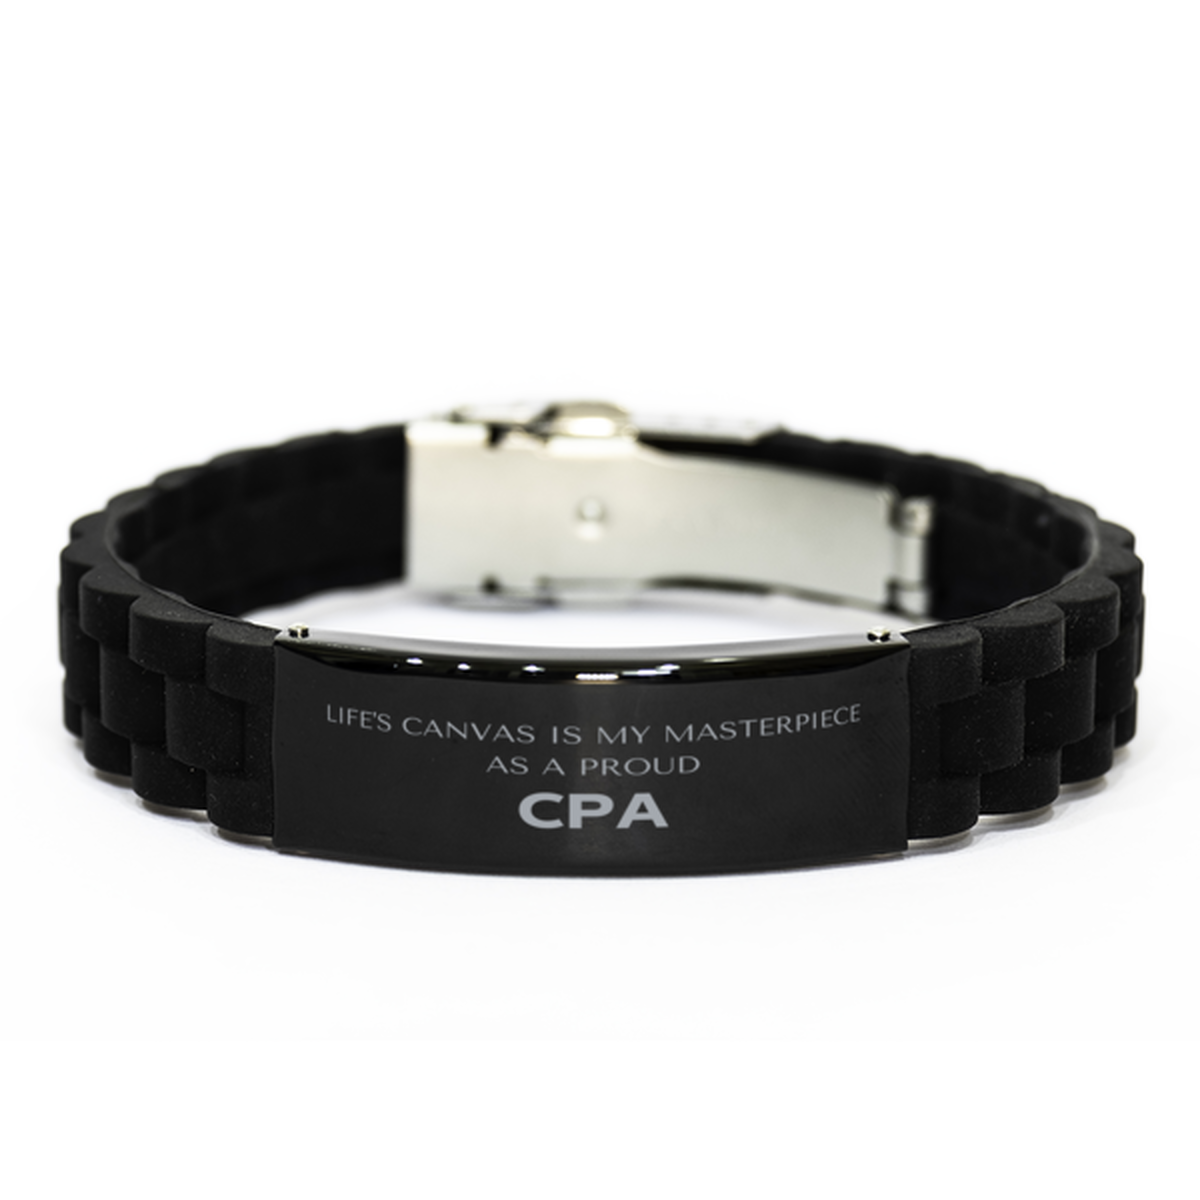 Proud CPA Gifts, Life's canvas is my masterpiece, Epic Birthday Christmas Unique Black Glidelock Clasp Bracelet For CPA, Coworkers, Men, Women, Friends